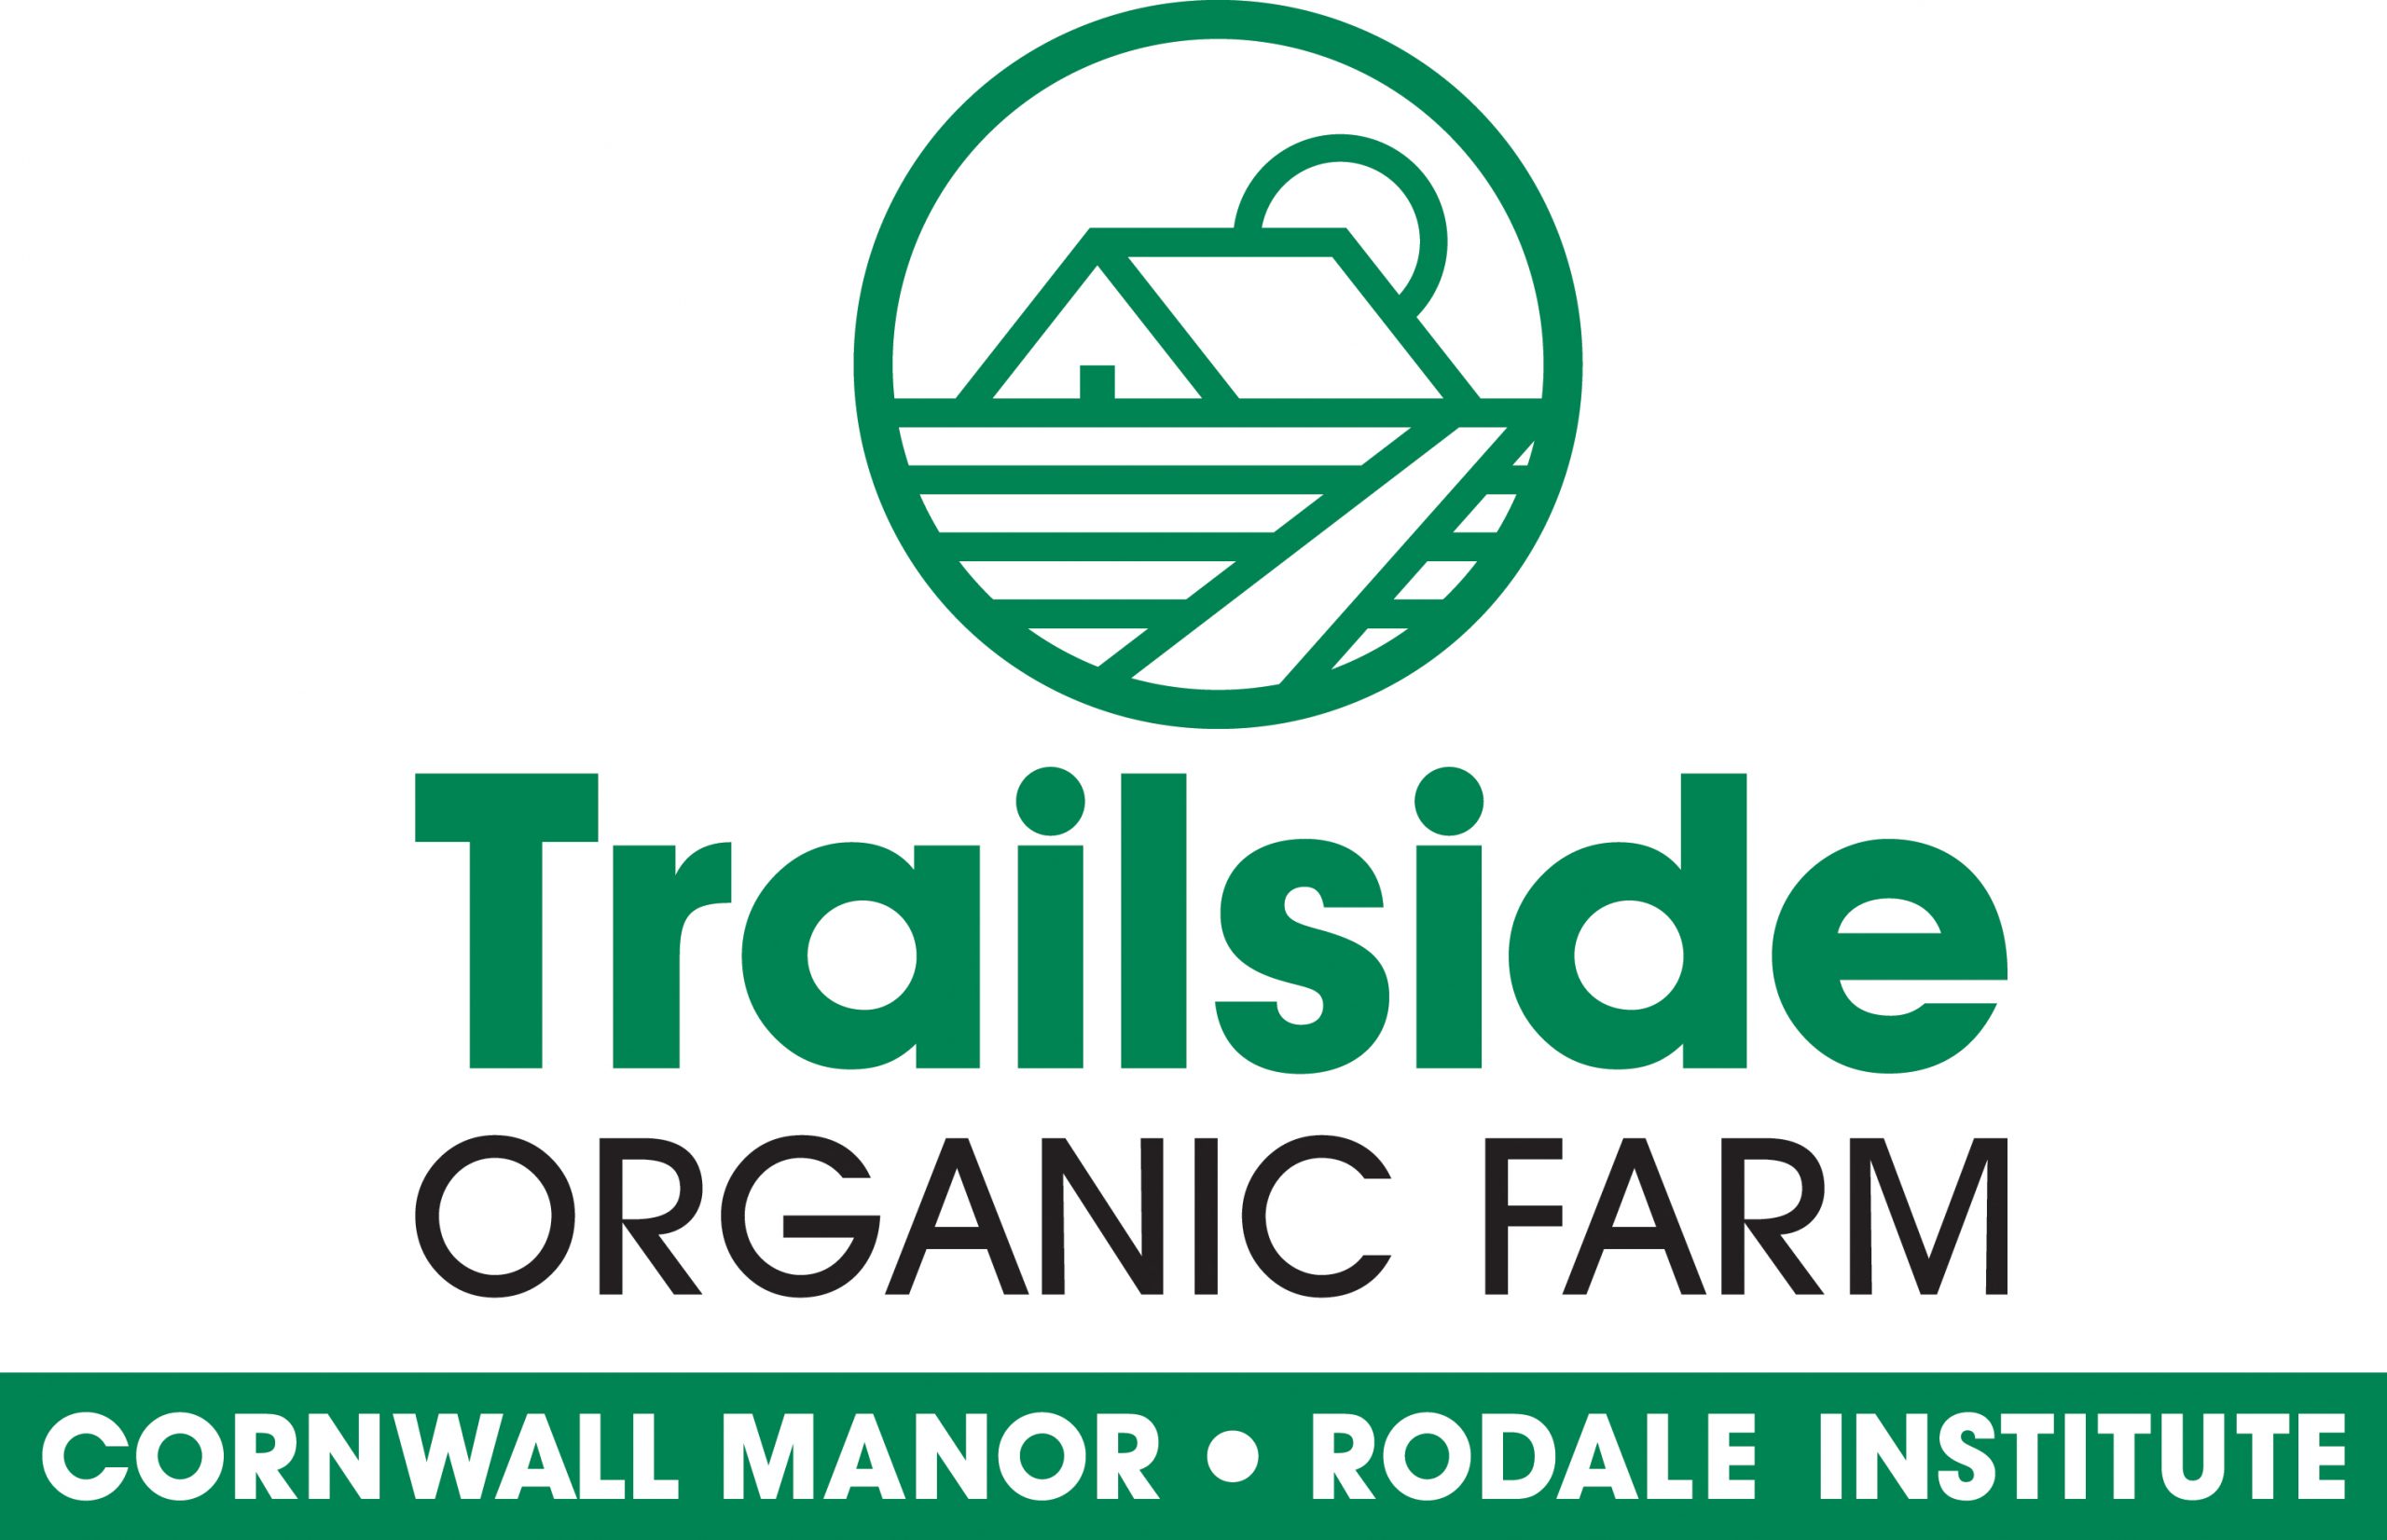 Trailside Organic Farm at Cornwall Manor with Rodale Institute